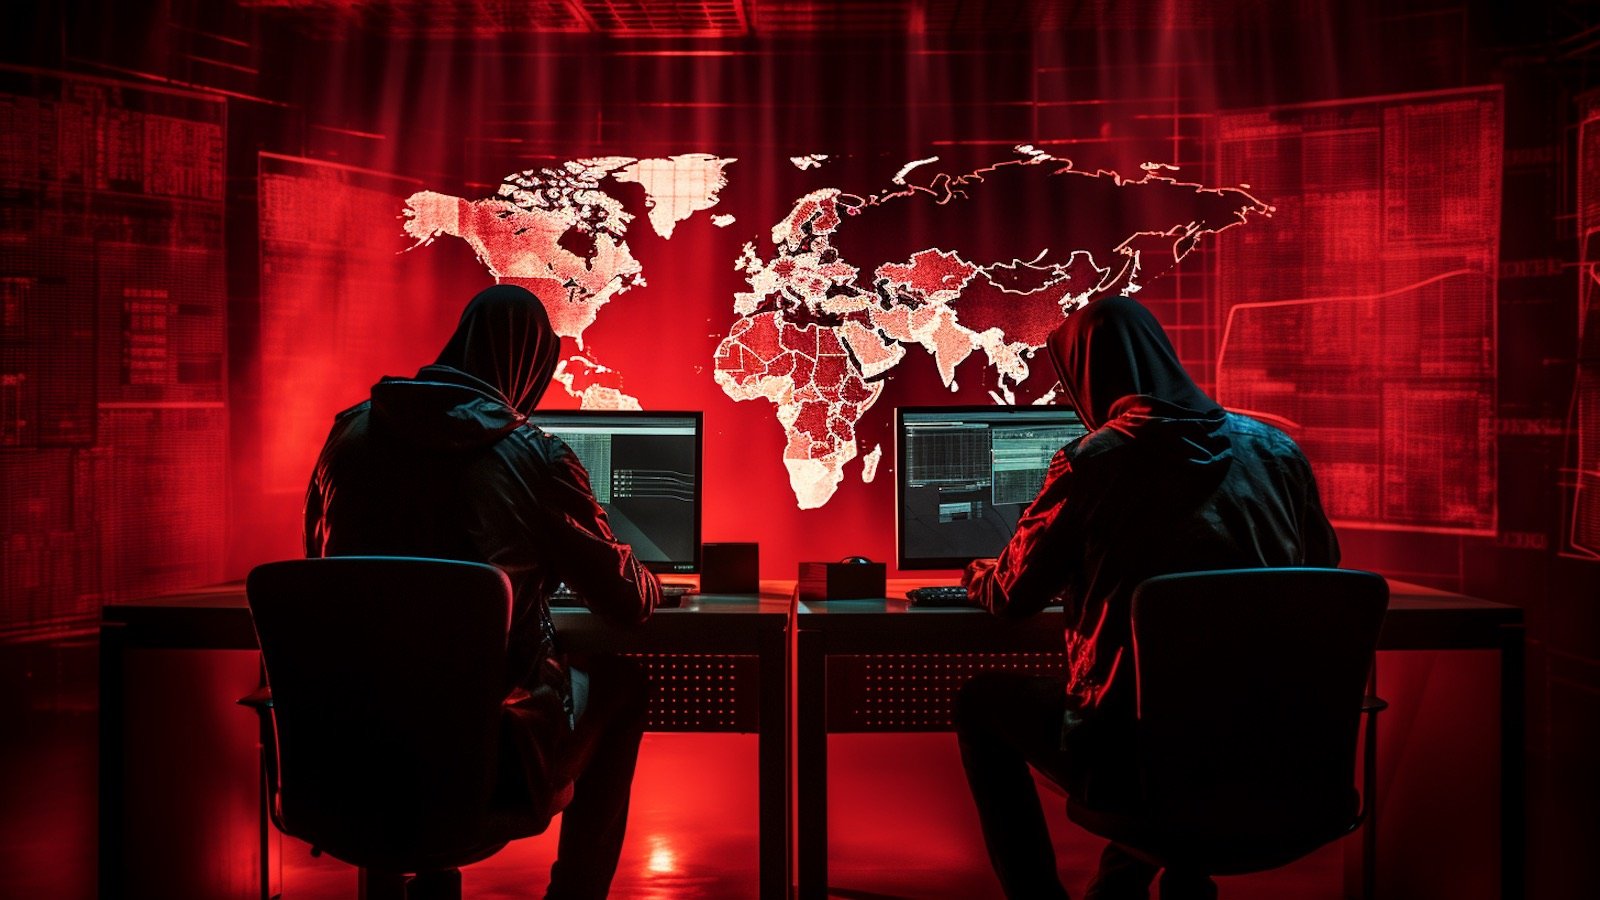 chinese-cyberspies-employ-ransomware-in-attacks-for-diversion